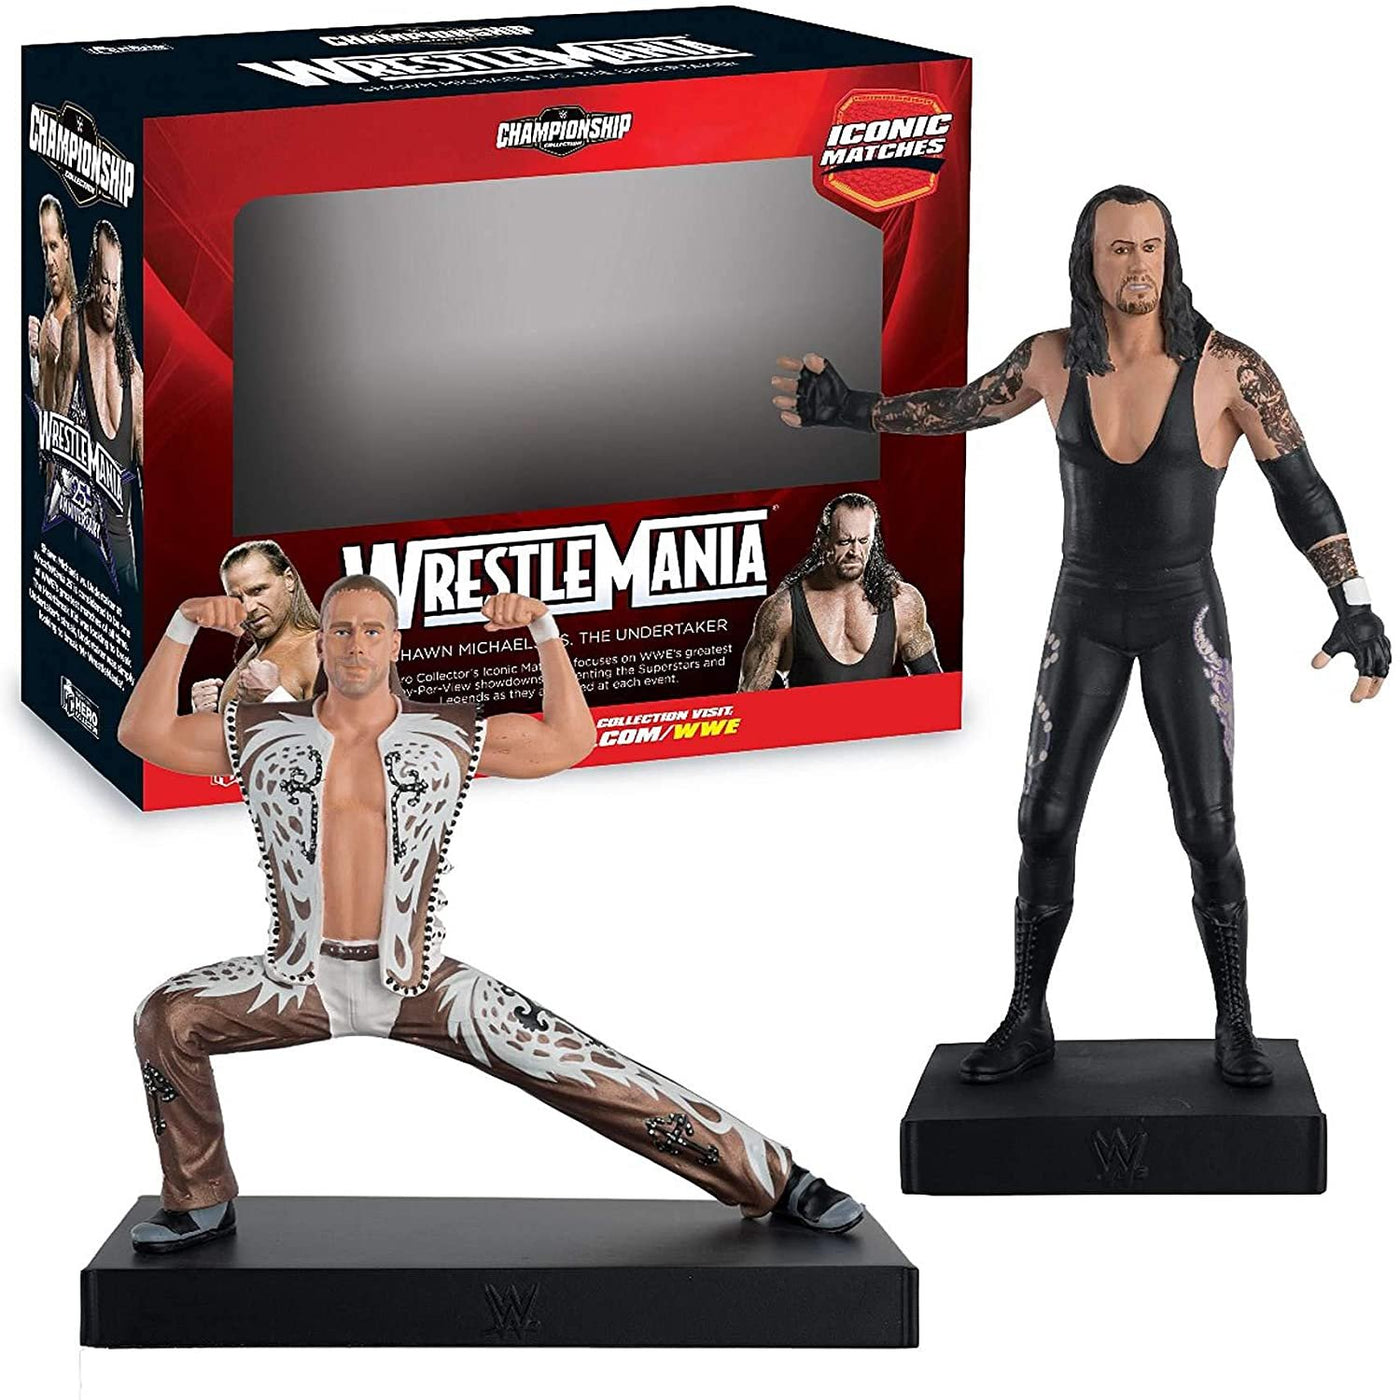 Hero Collector WWE Championship Collection - Wrestlemania 25 Double Pack: The Undertaker & Shawn Michaels